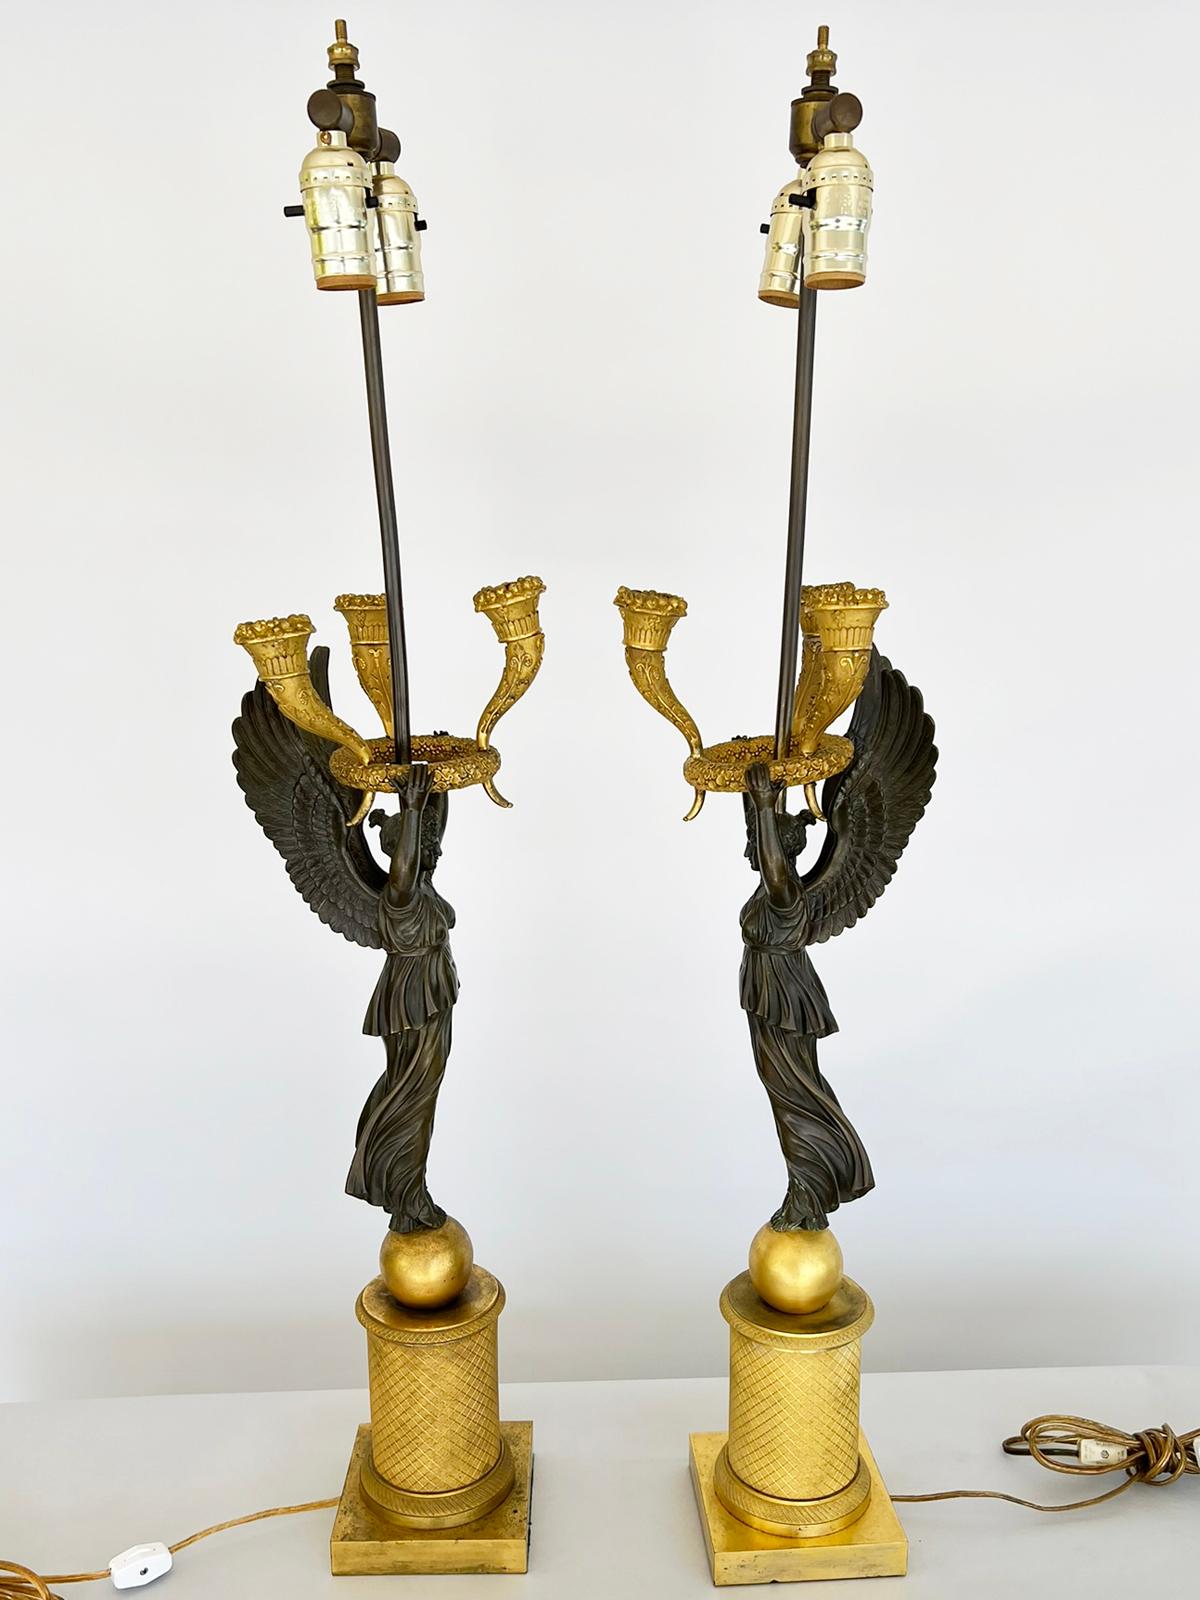 French Pair of Late Empire Ormolu and Patented Bronze Figural Candelabra Lamps, C. 1815 For Sale